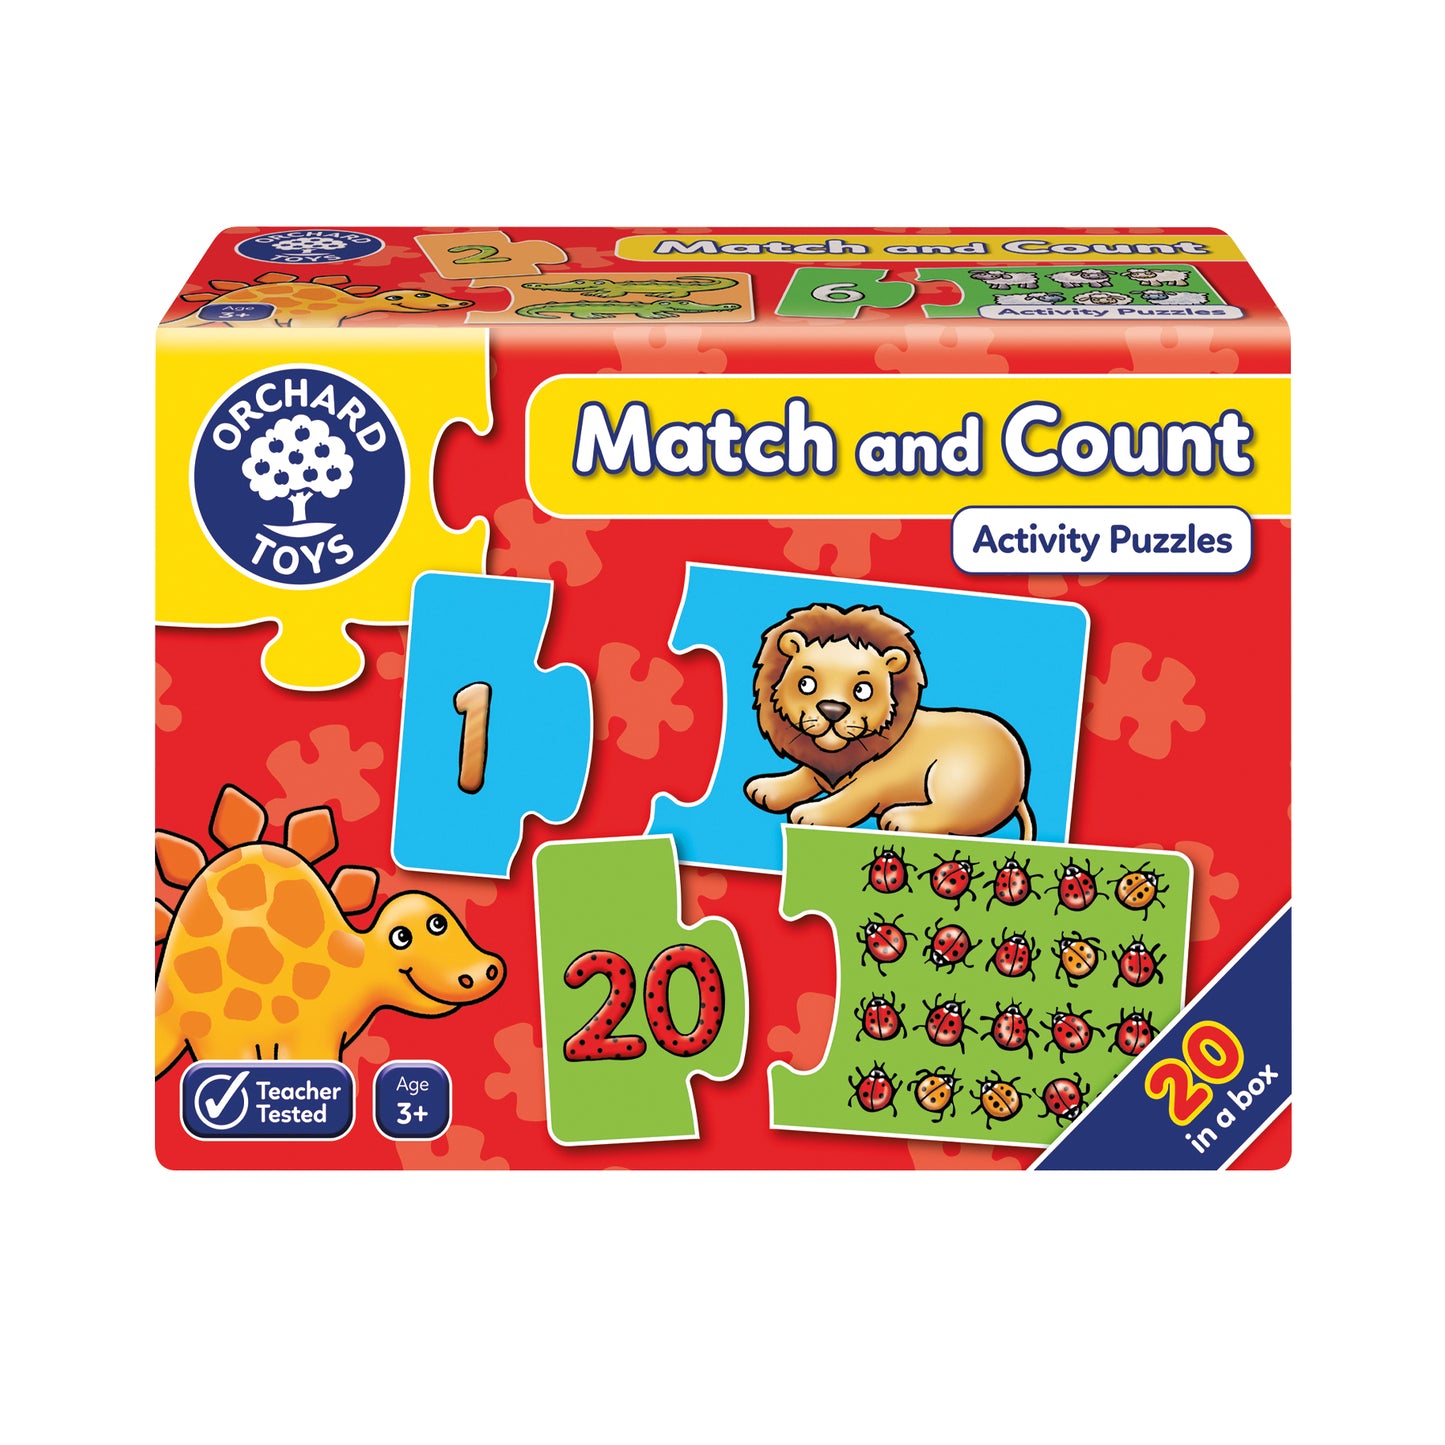 Orchard Toys Match and Count Jigsaw Puzzle